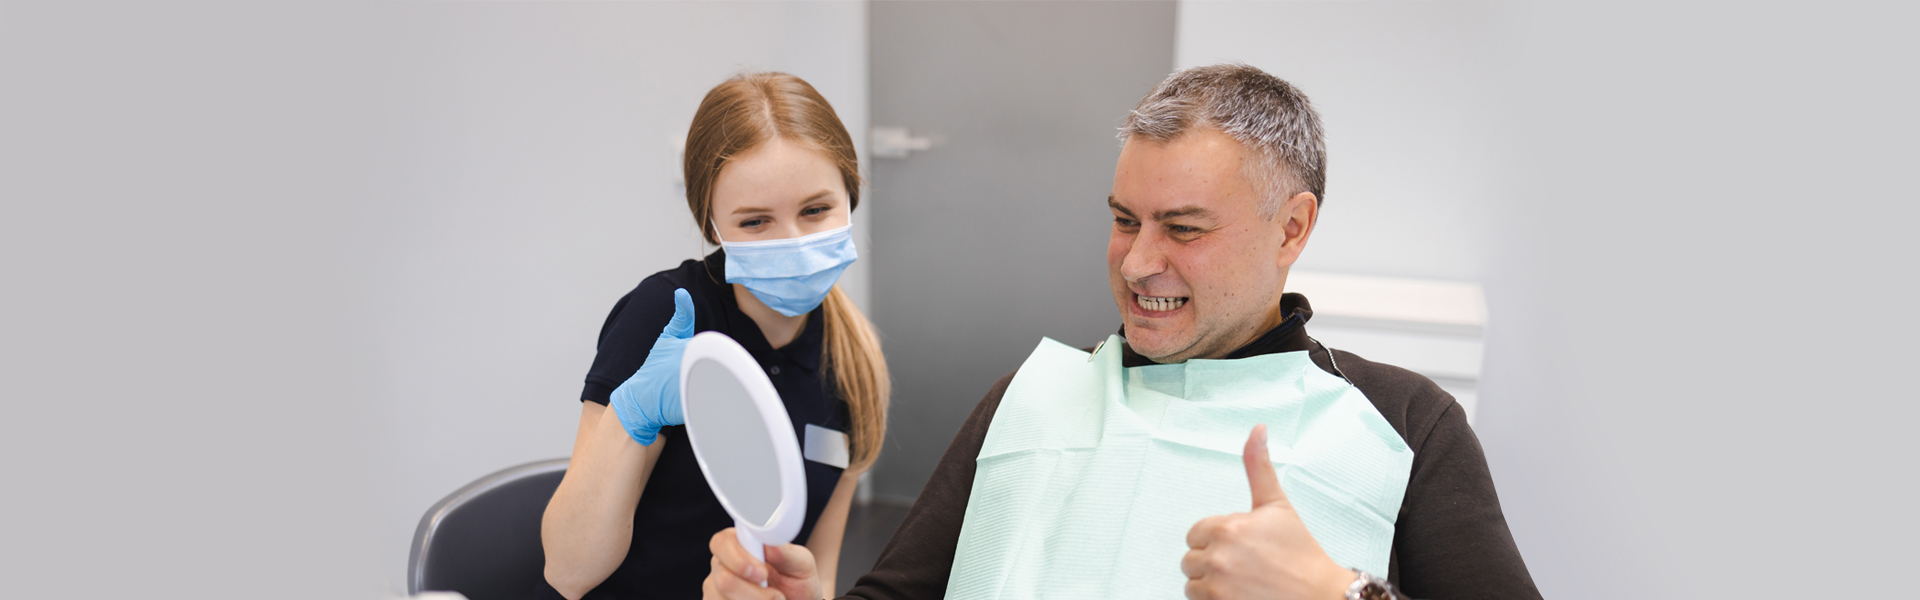 Healing Stages after Tooth Extraction: A Timeline of Recovery